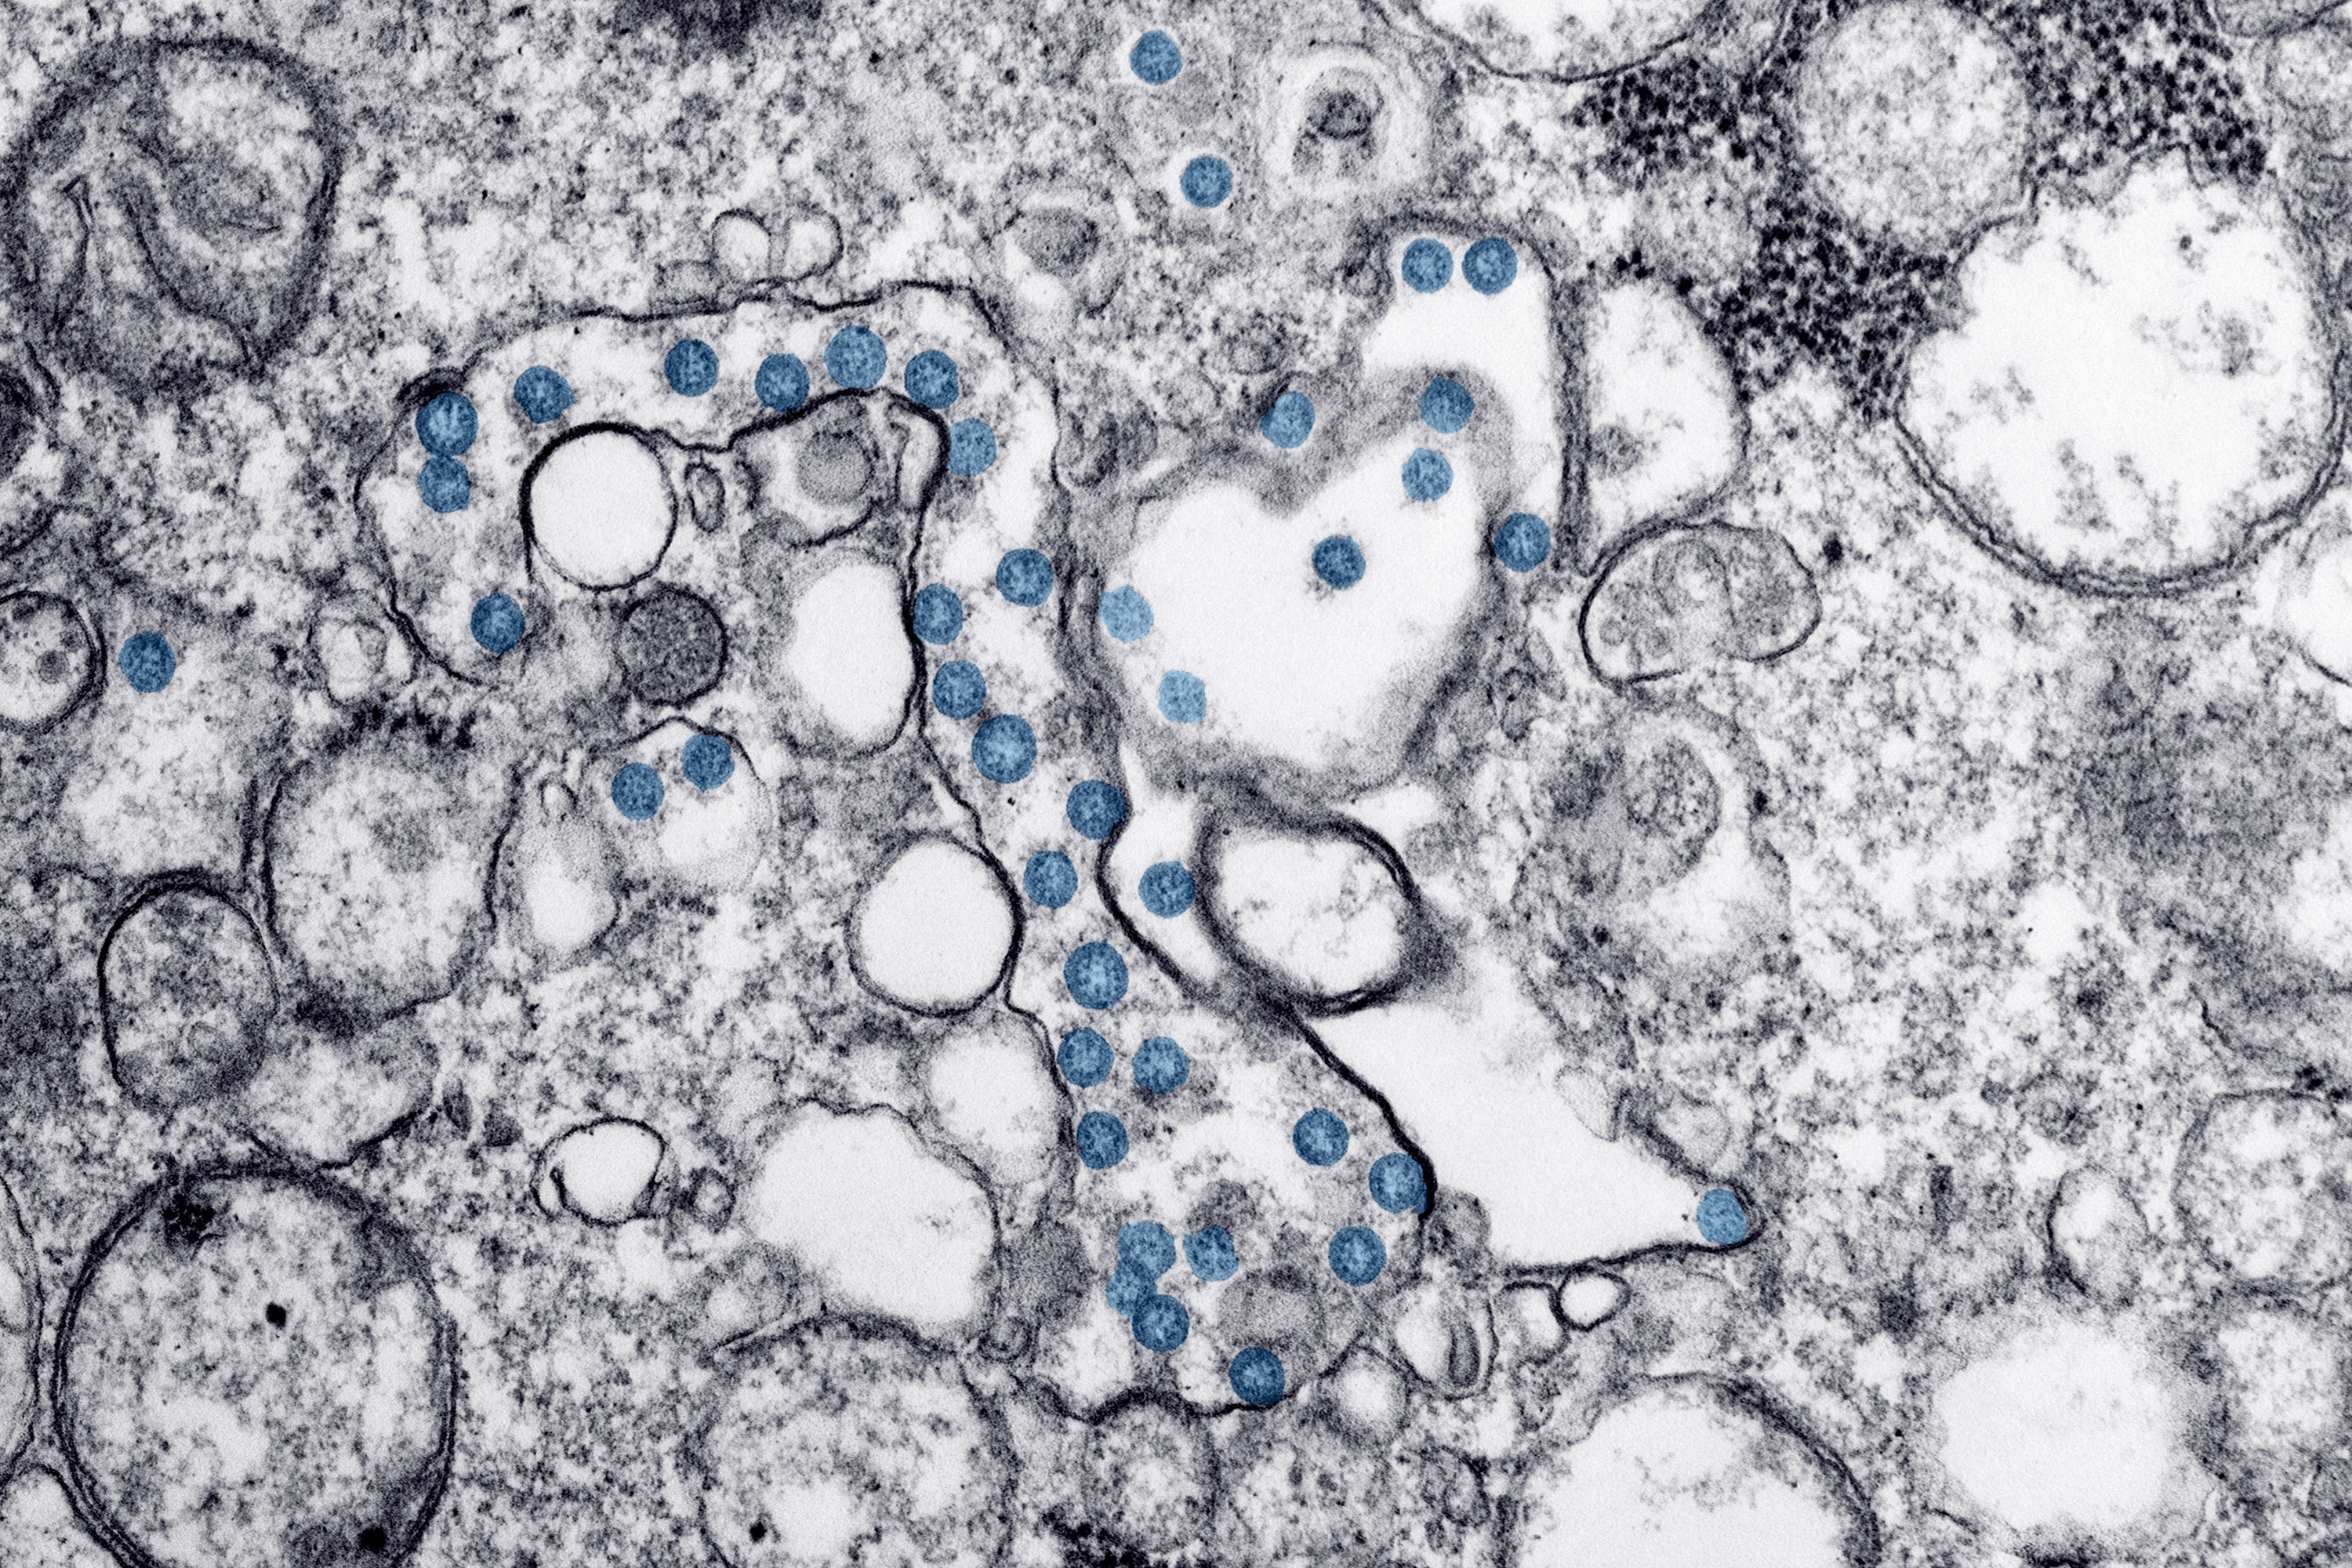 SARS-CoV-2 virus particles, in blue, imaged in an electron microscope (CDC) image.